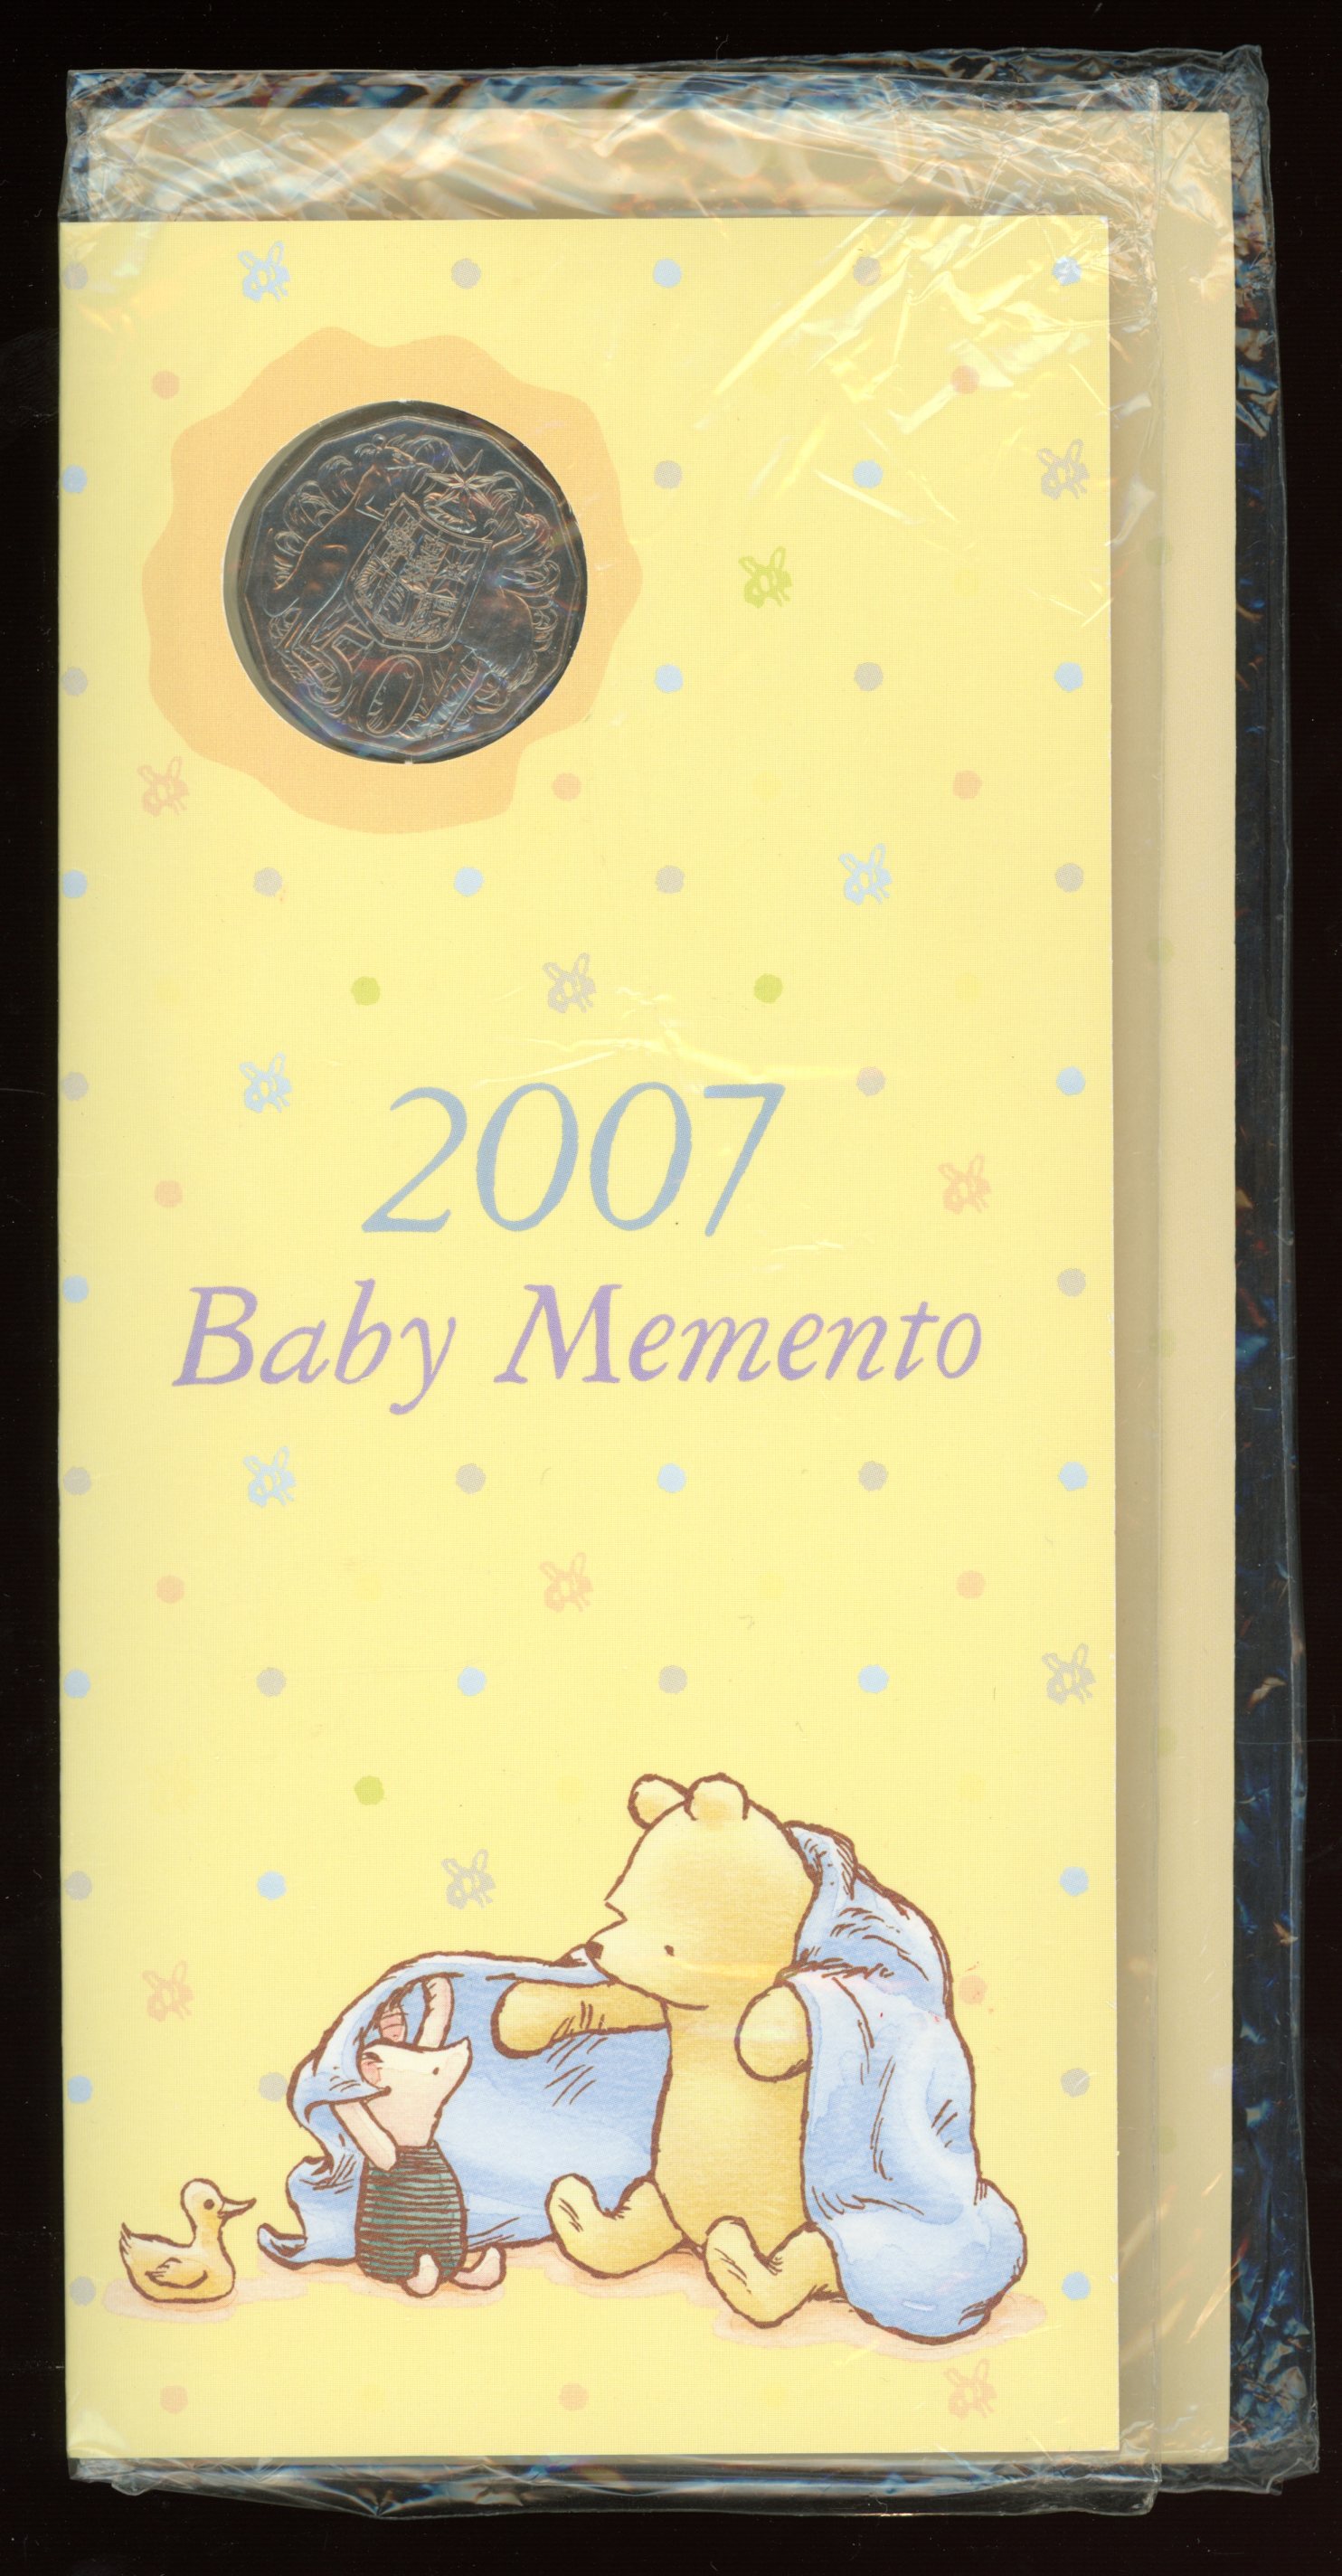 Thumbnail for 2007 Baby Memento Uncirculated 50c Coin